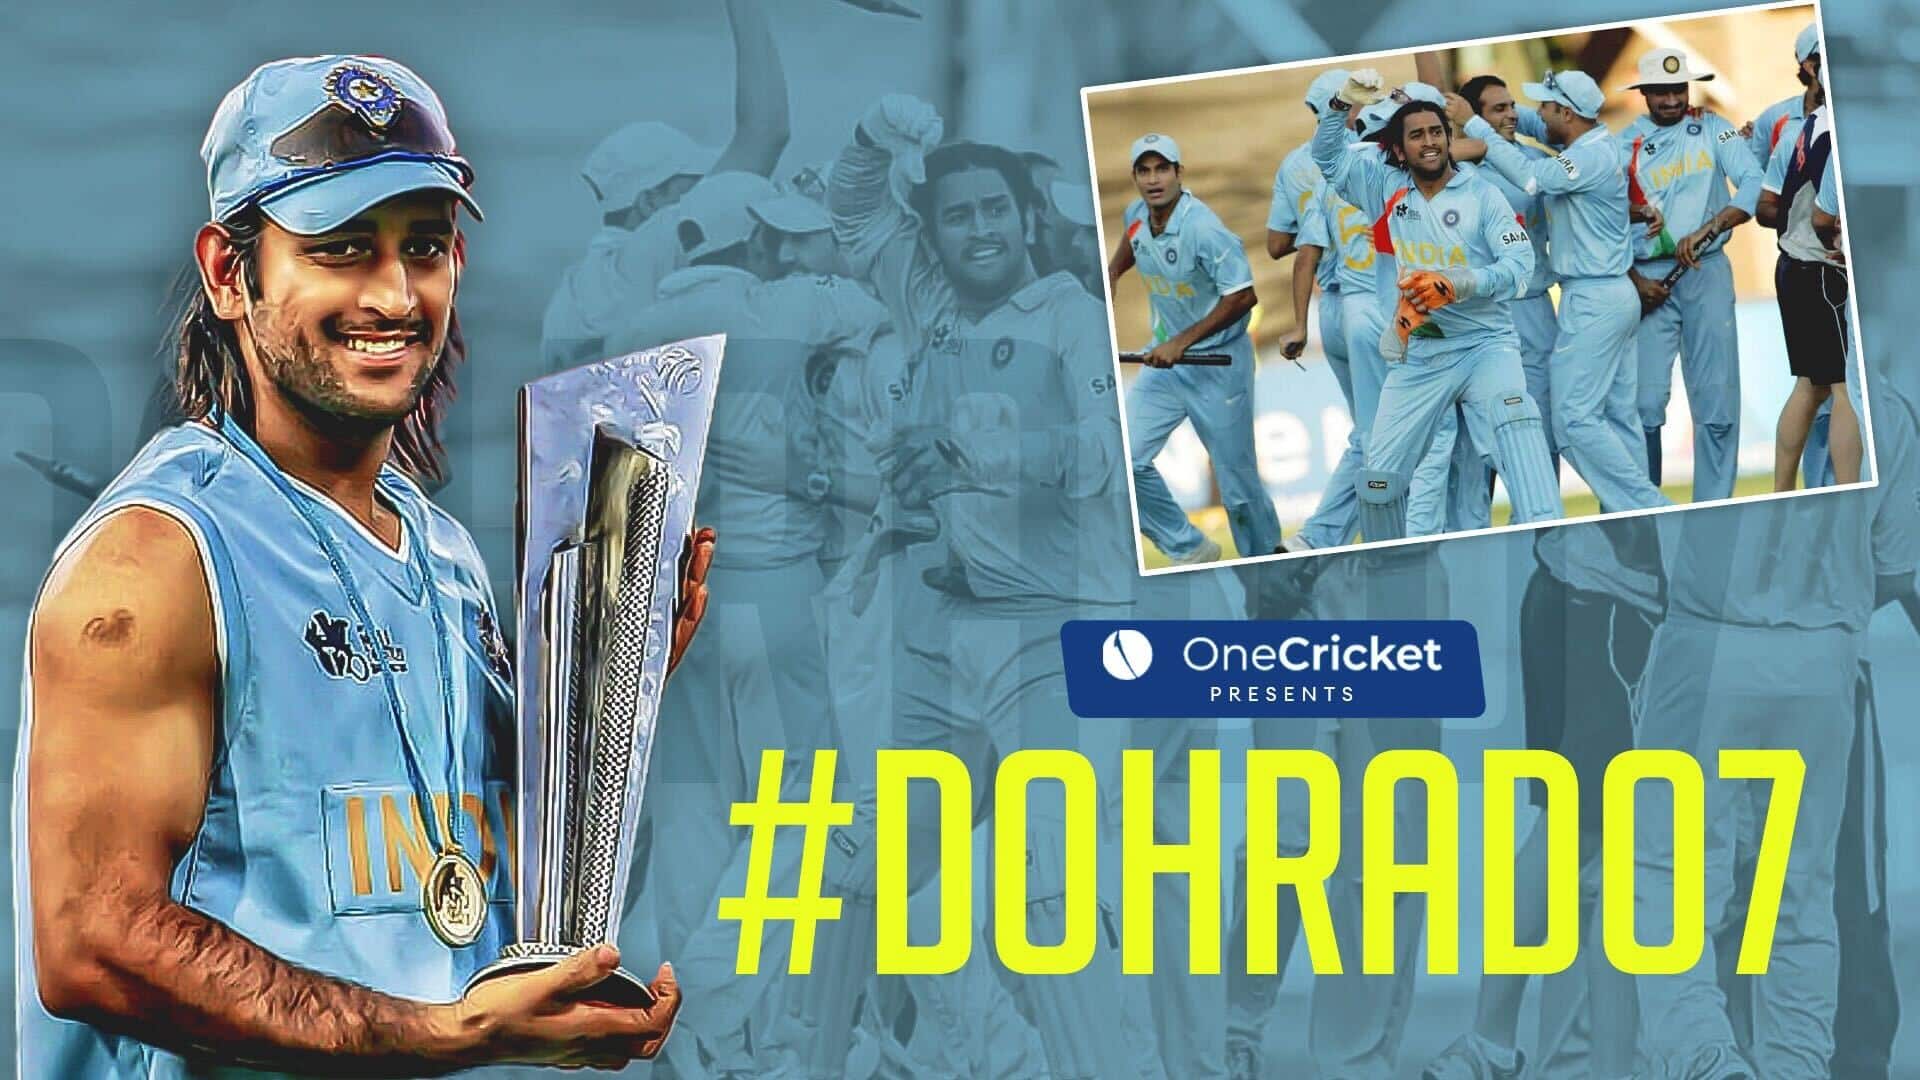 #Dohrado7: OneCricket's T20 World Cup promo video is out. Watch here! 
